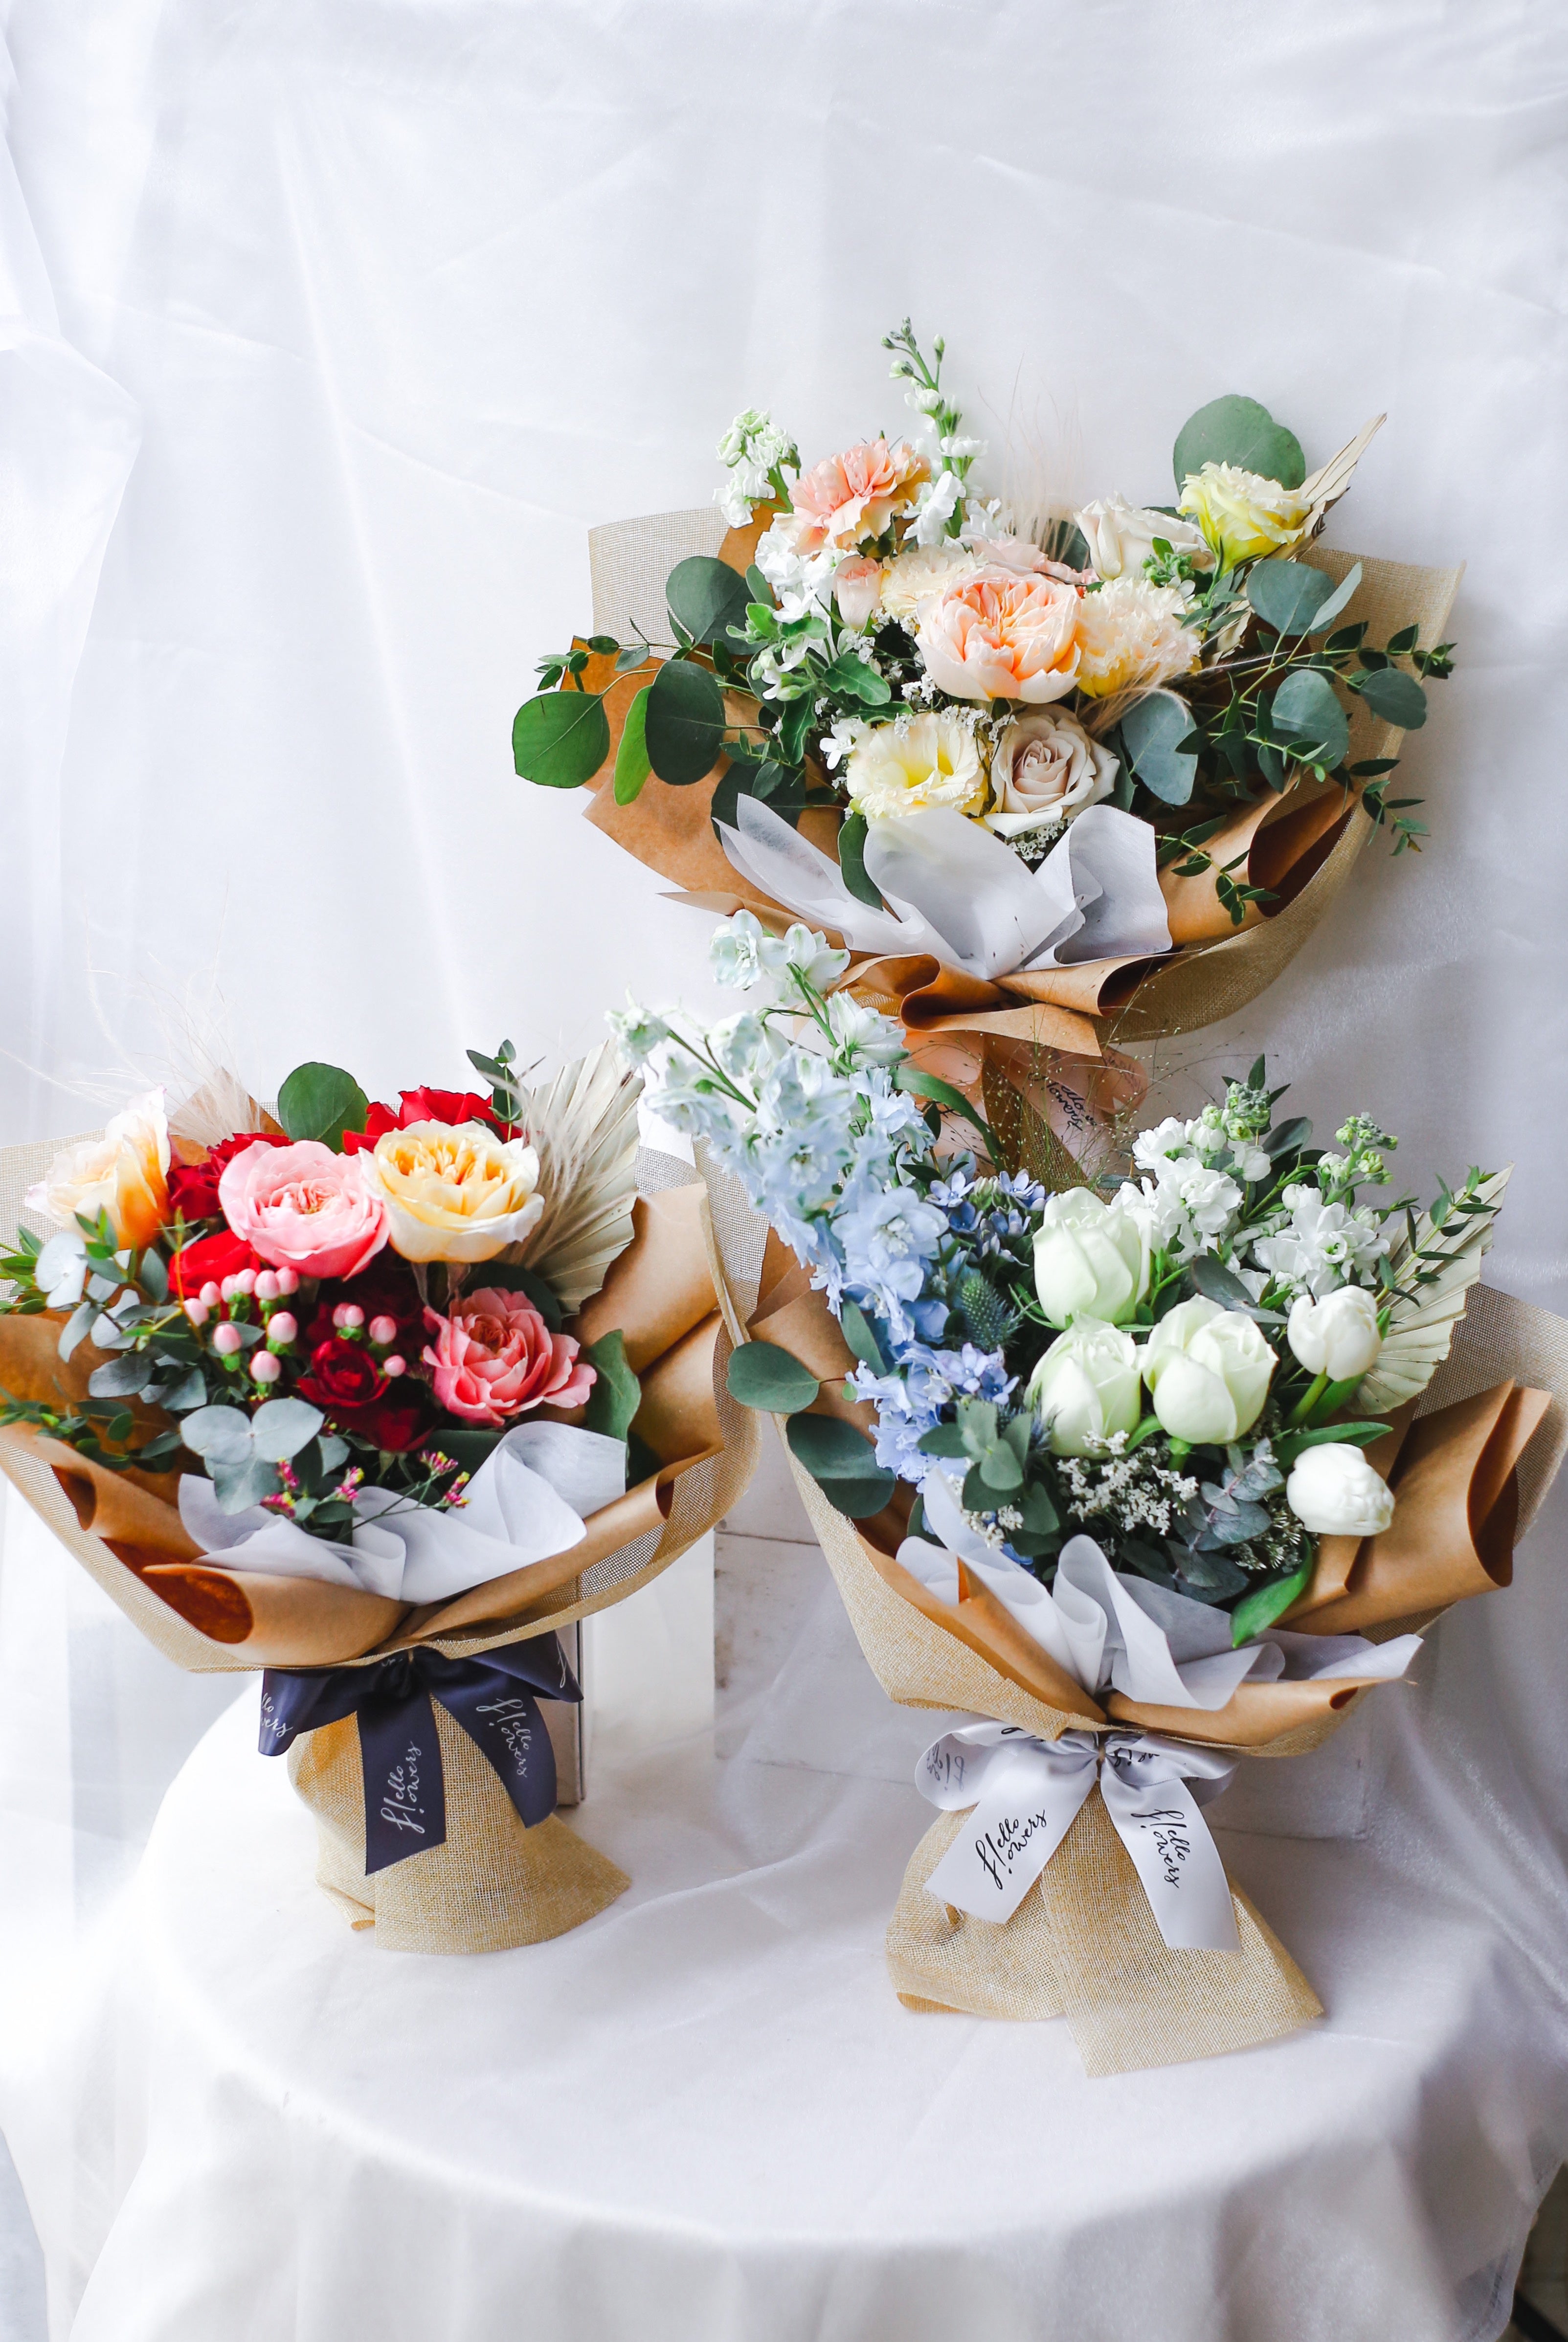 How to Choose the Perfect Flower Bouquet for Any Occasion